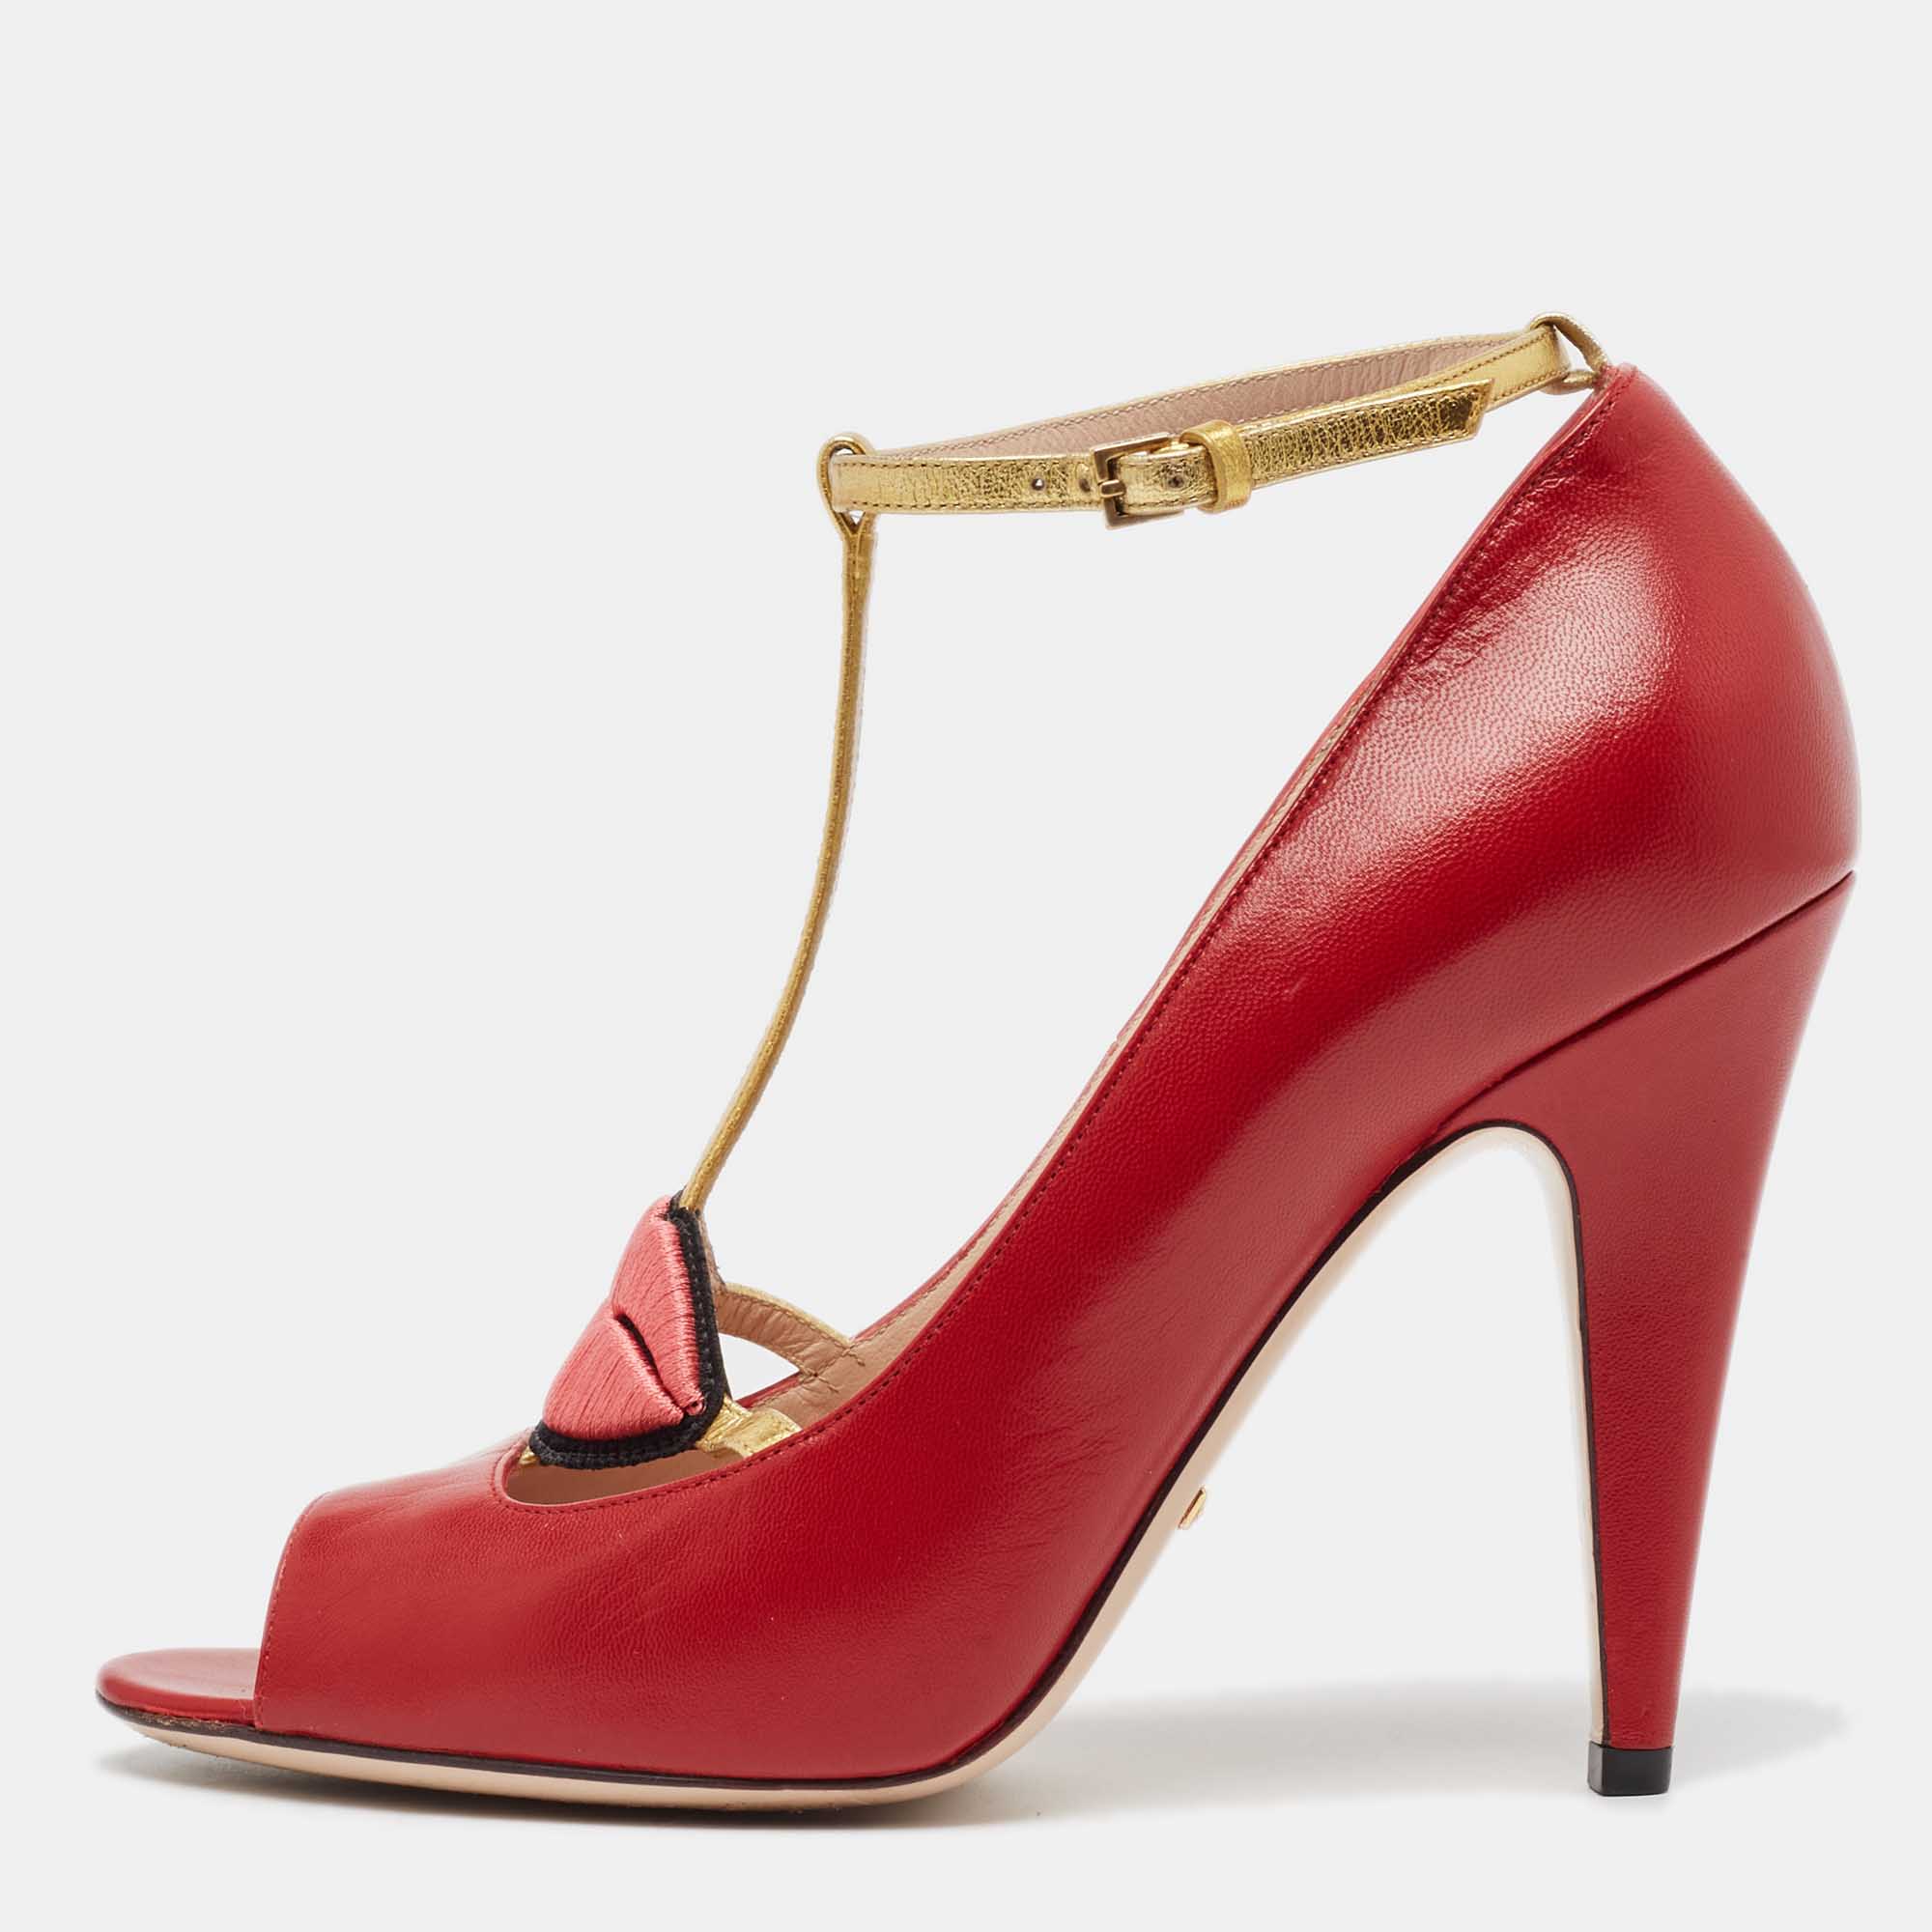 Gucci red/gold leather molina pumps size 38.5